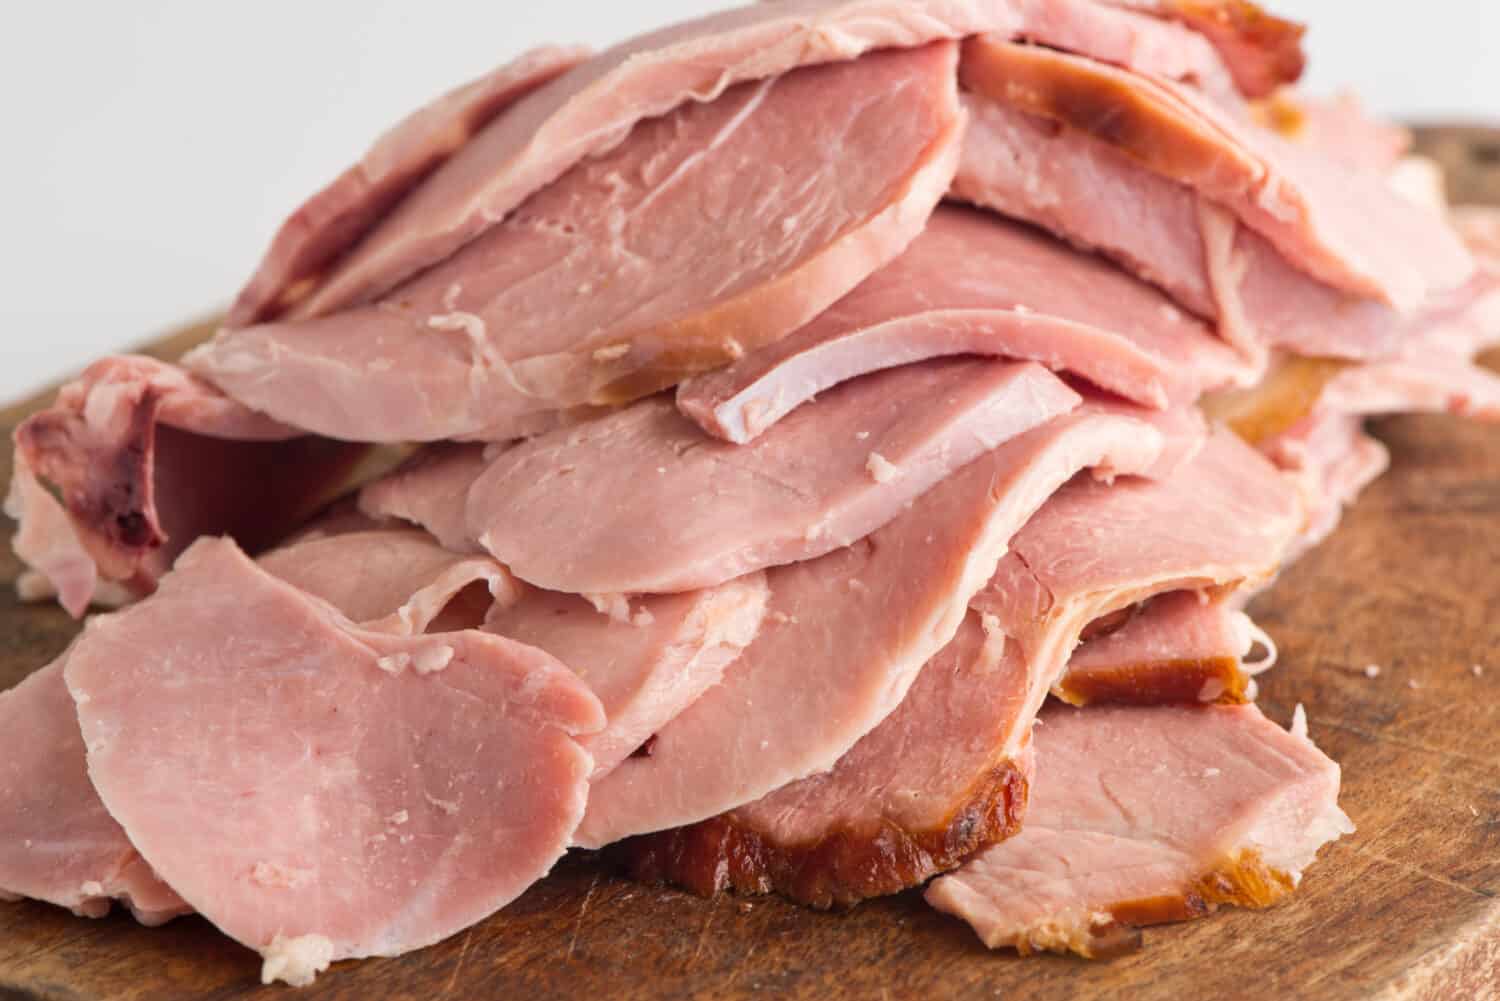 Ham. Cured country ham. Classic delicatessen or butcher shop staple. Whole ham, carved with a butchers knife. Lunch or dinner favorite, meat ideal for sandwiches or served with vegetables.